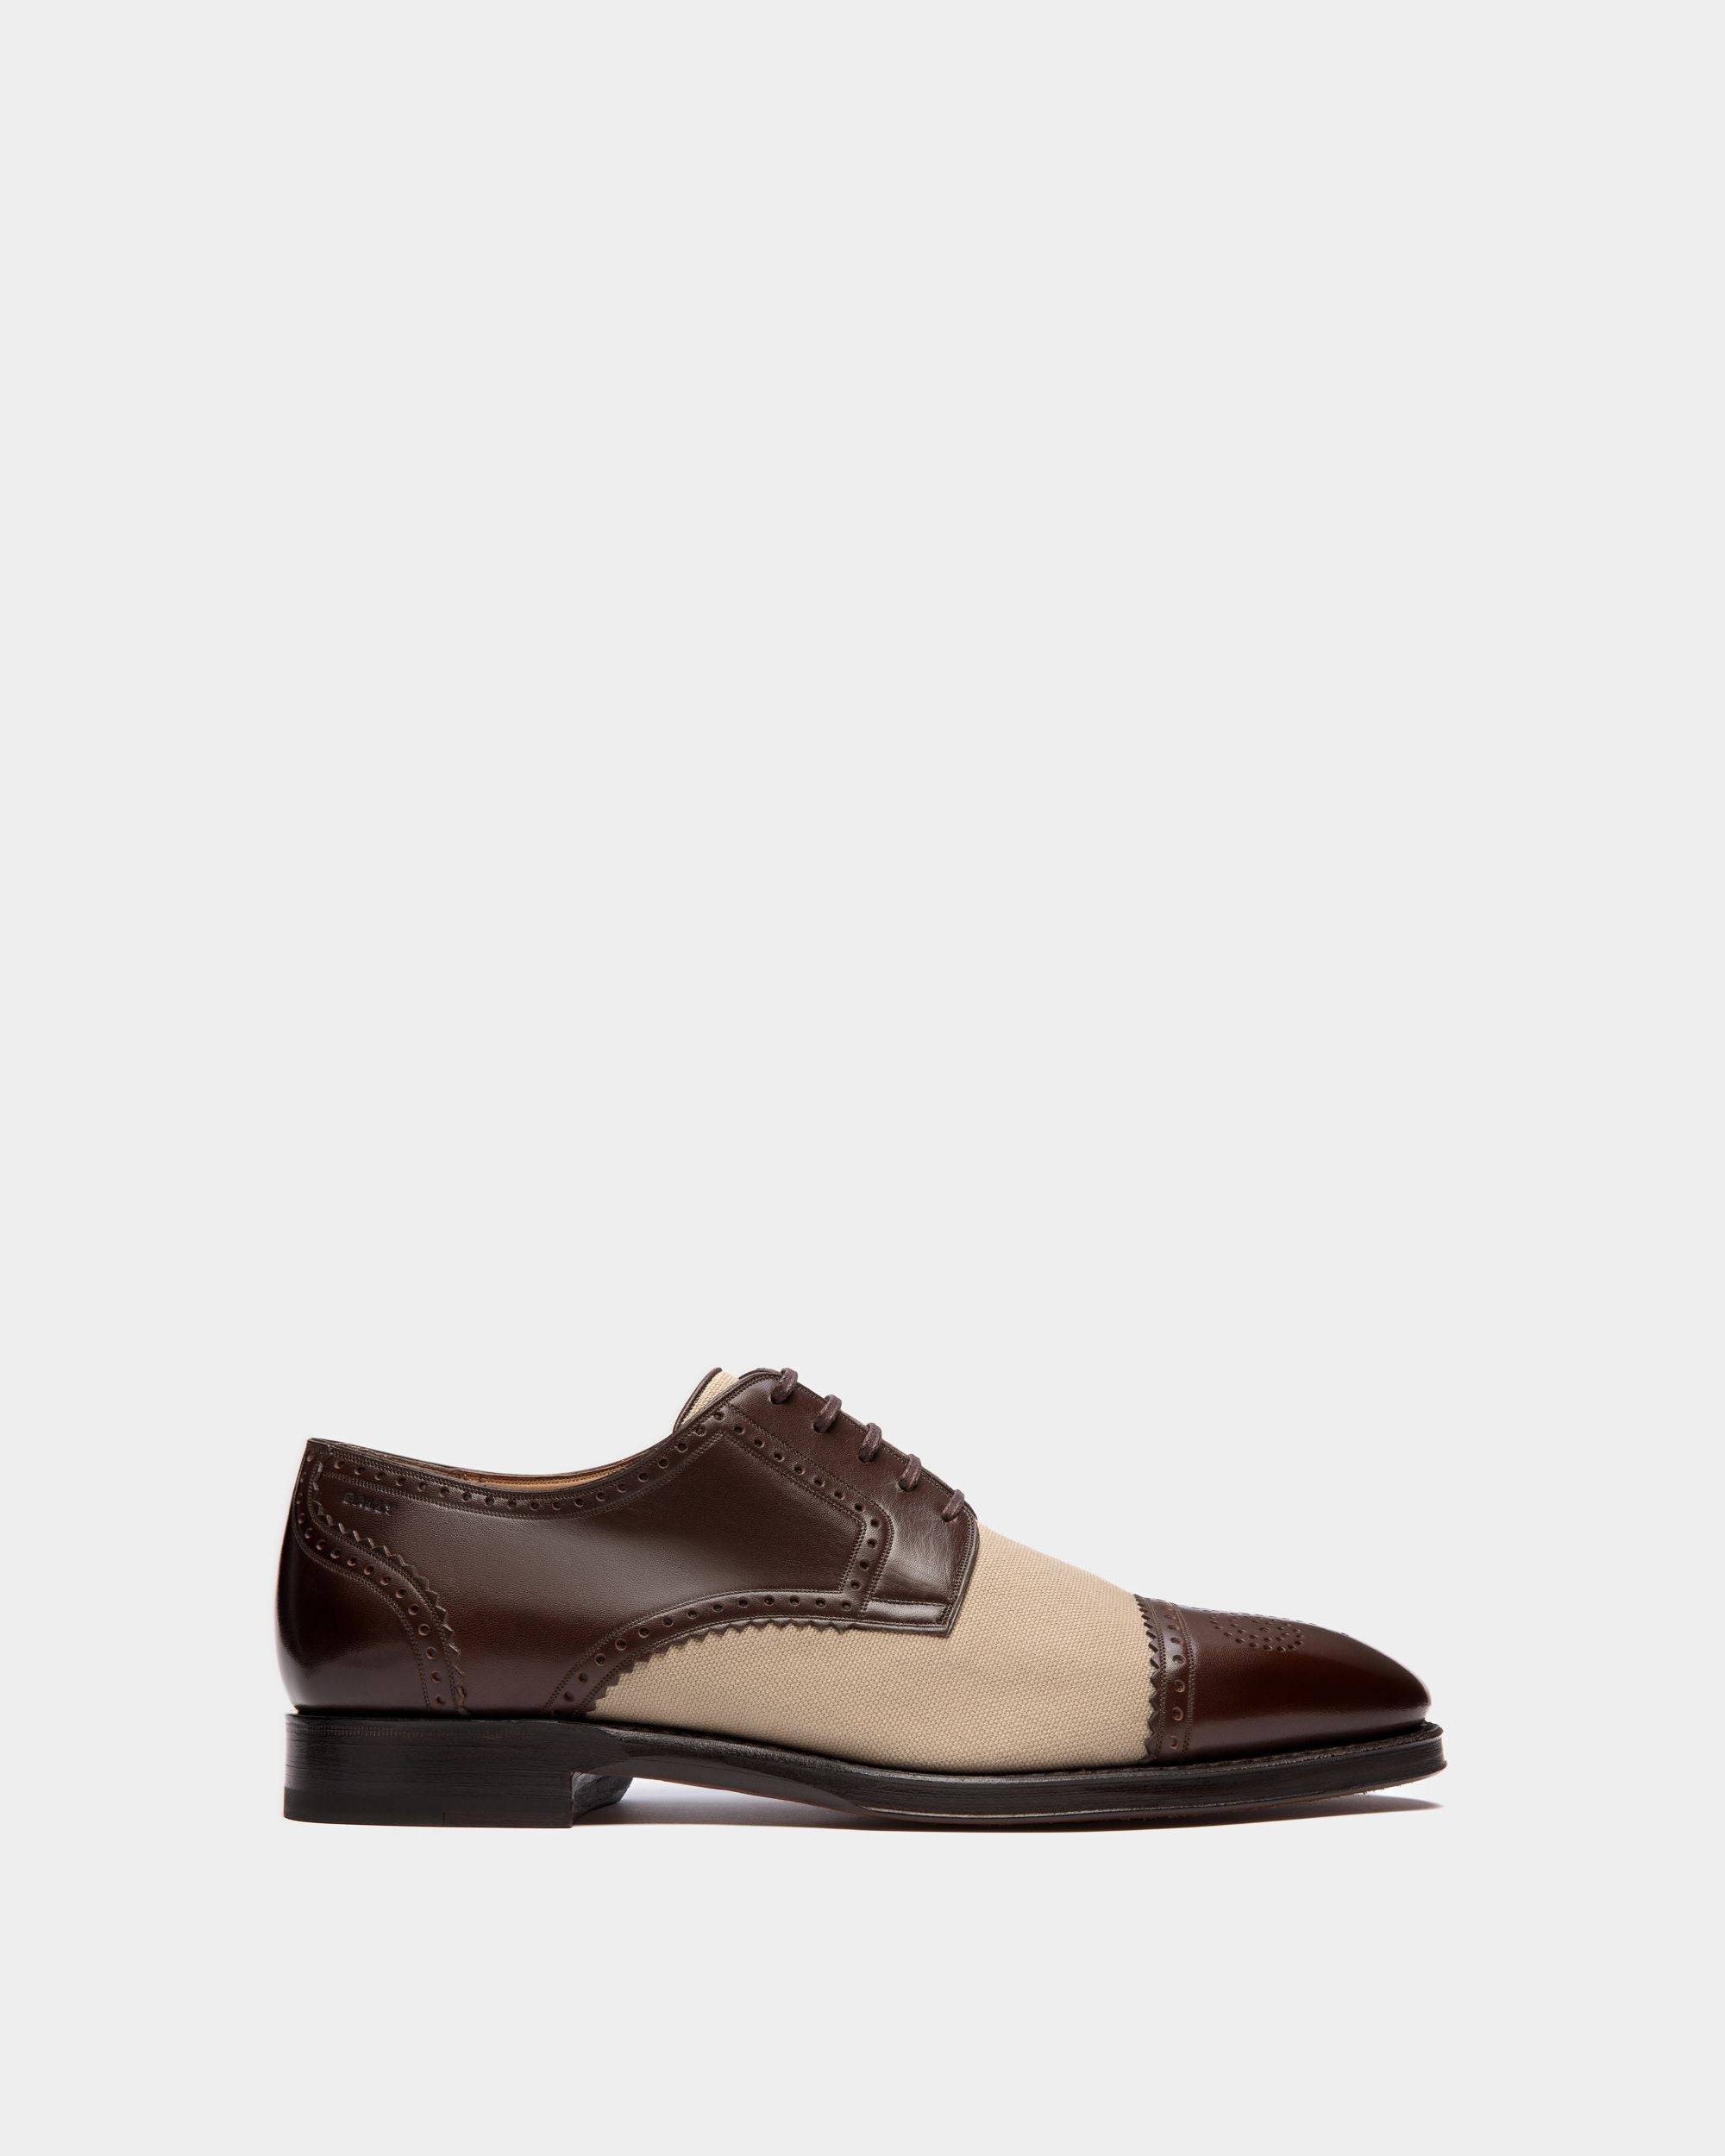 Men's Scribe Derby in Leather and Fabric | Bally | Still Life Side